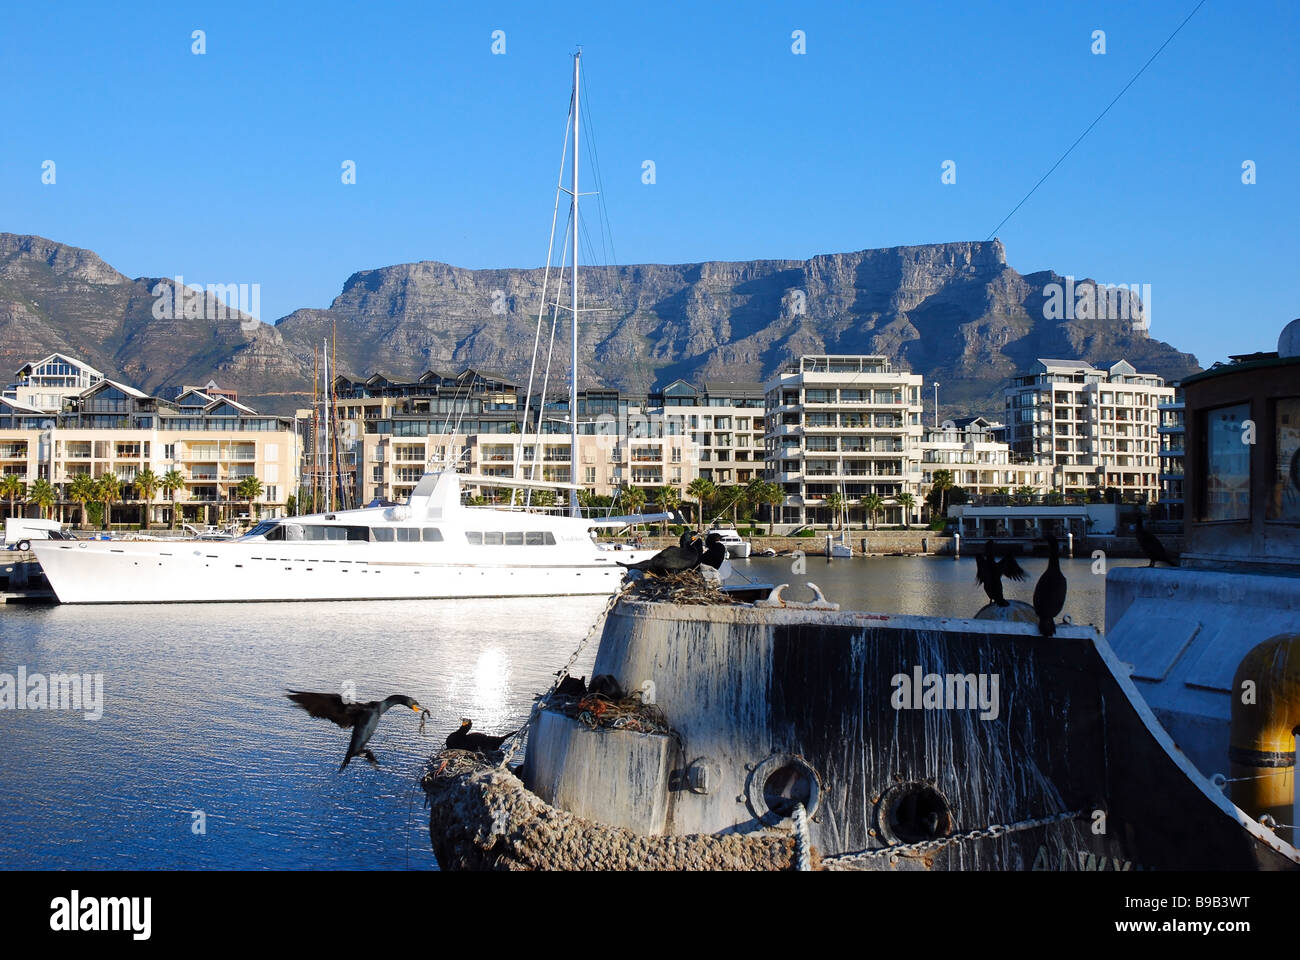 Cormorants nesting on the bows of an old tugboat in the Alfred Basin, Victoria and Alfred Waterfront, Cape Town, South Africa Stock Photo